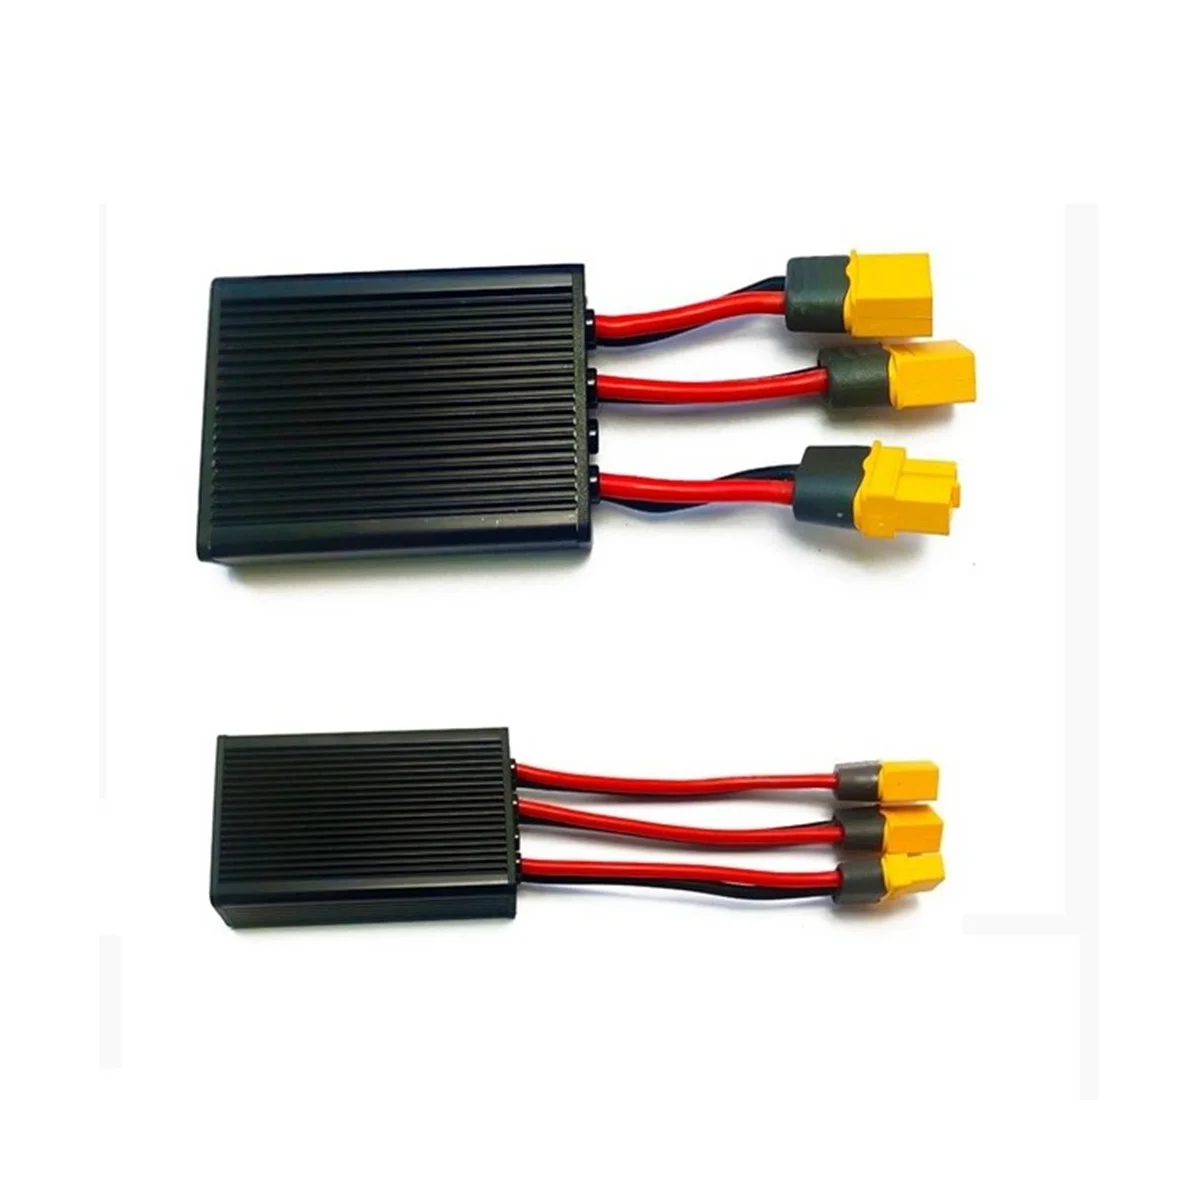 

20V-72V 30A 40A Dual Battery Connector for Increase the Capacity By Connecting 2 Batteries Parallel Equalization Module